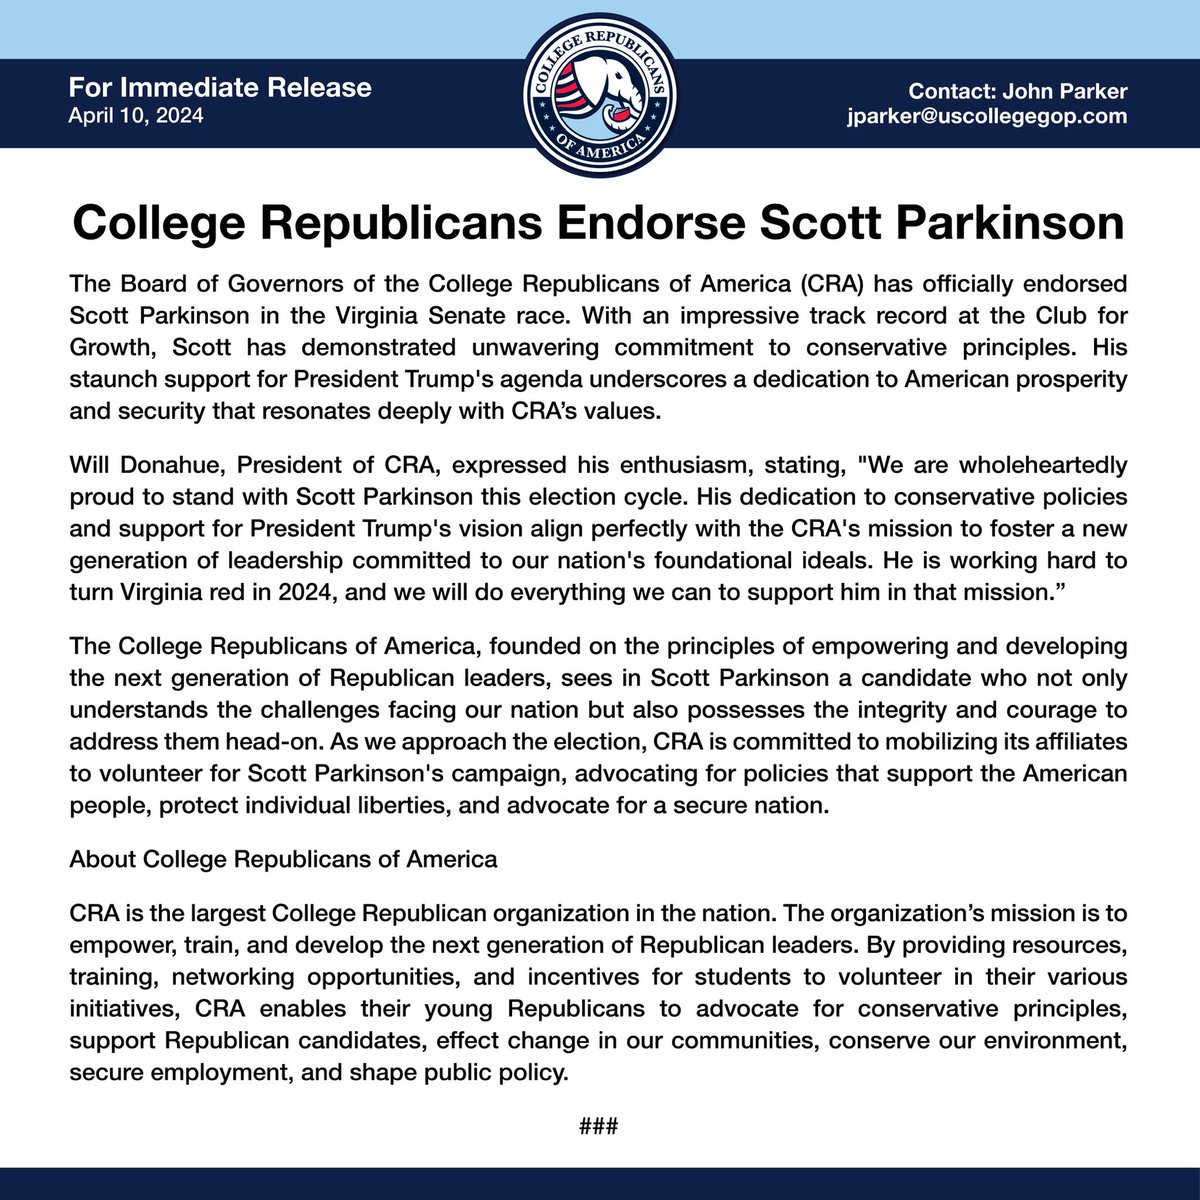 College Republicans of America is thrilled to announce our official endorsement of Scott T. Parkinson for U.S Senate in Virginia. We look forward to seeing @ScottTParkinson defeat Tim Kaine and take conservative values into to the U.S Senate this year.